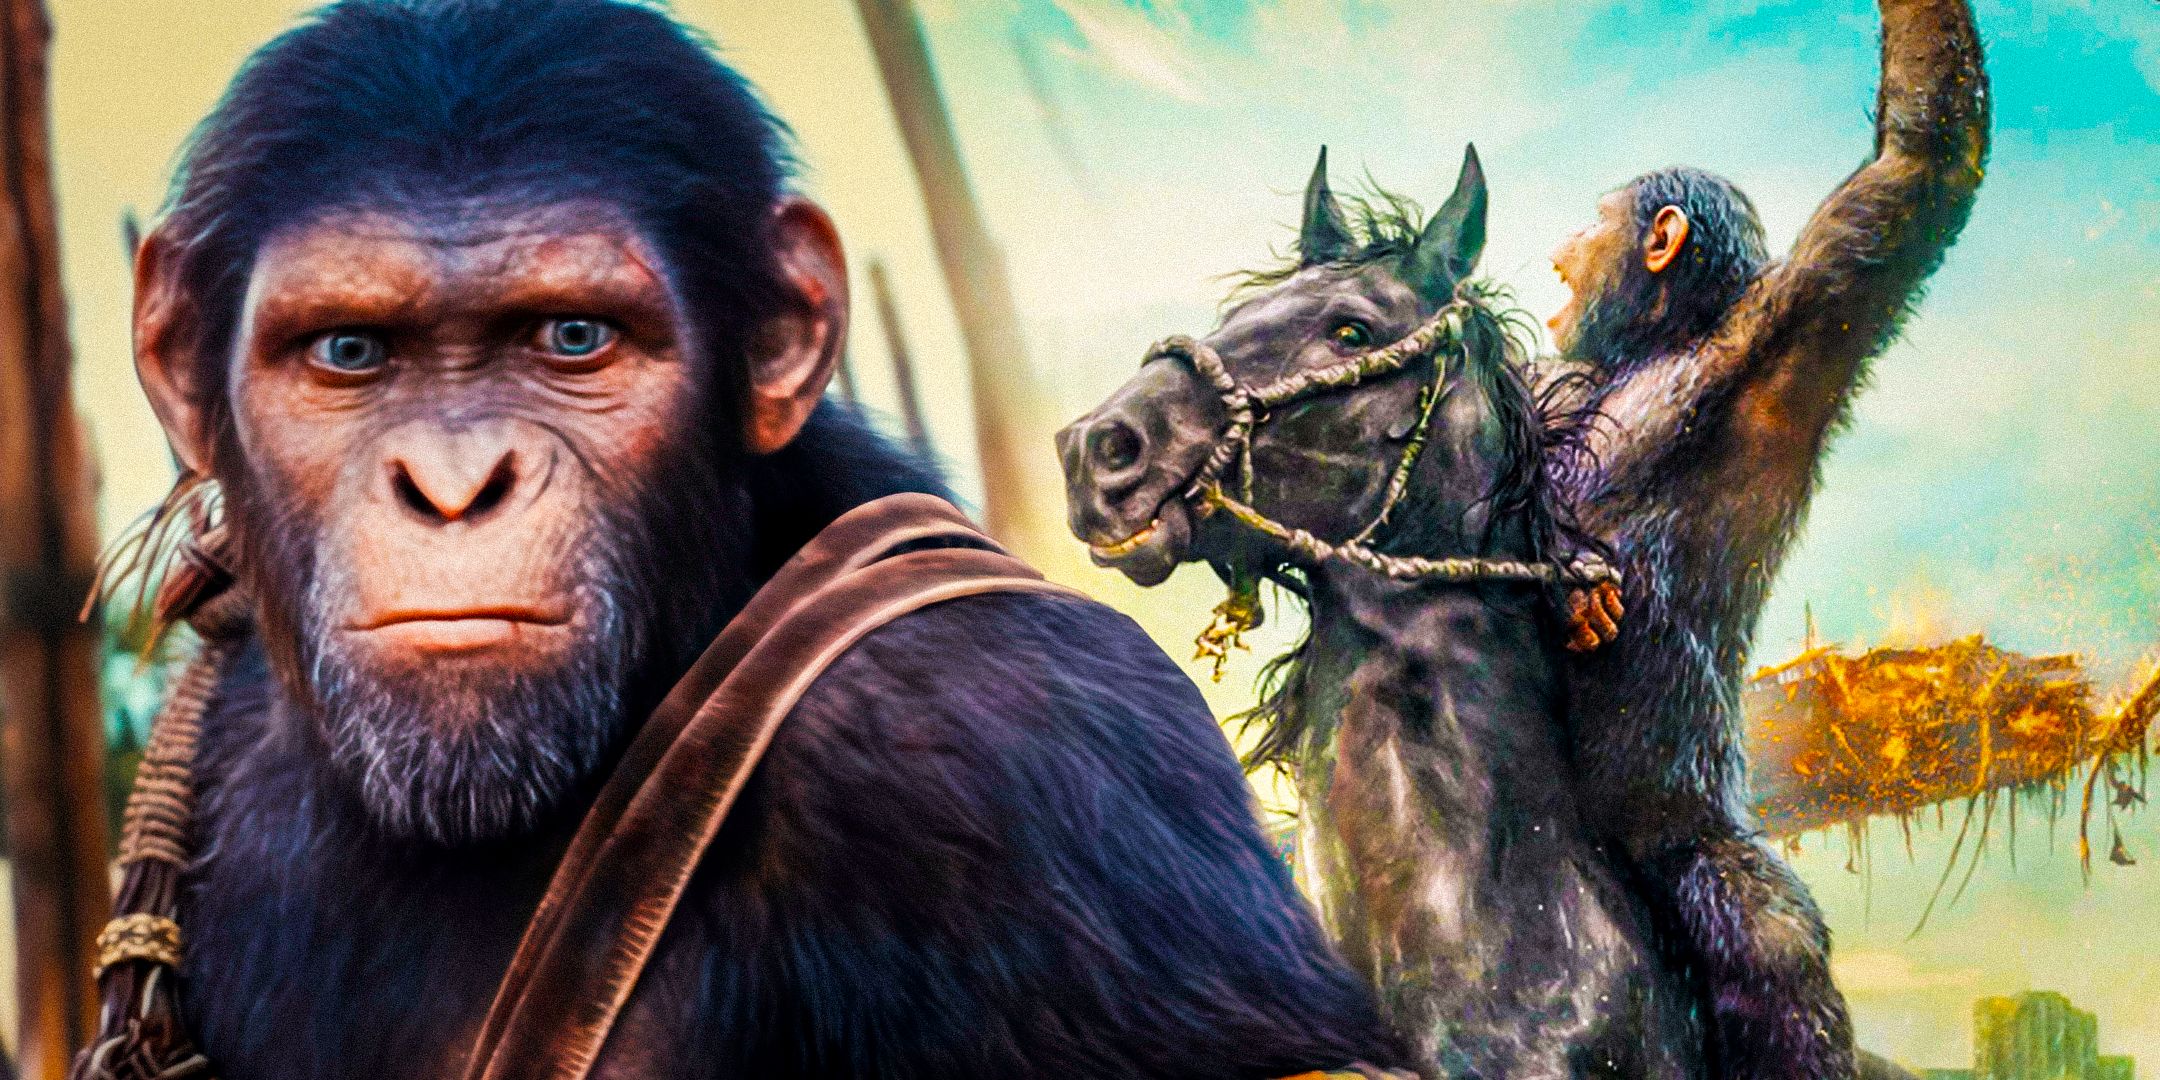 An ape rides a horse while Noa from Kingdom of the Planet of the Apes looks worried.